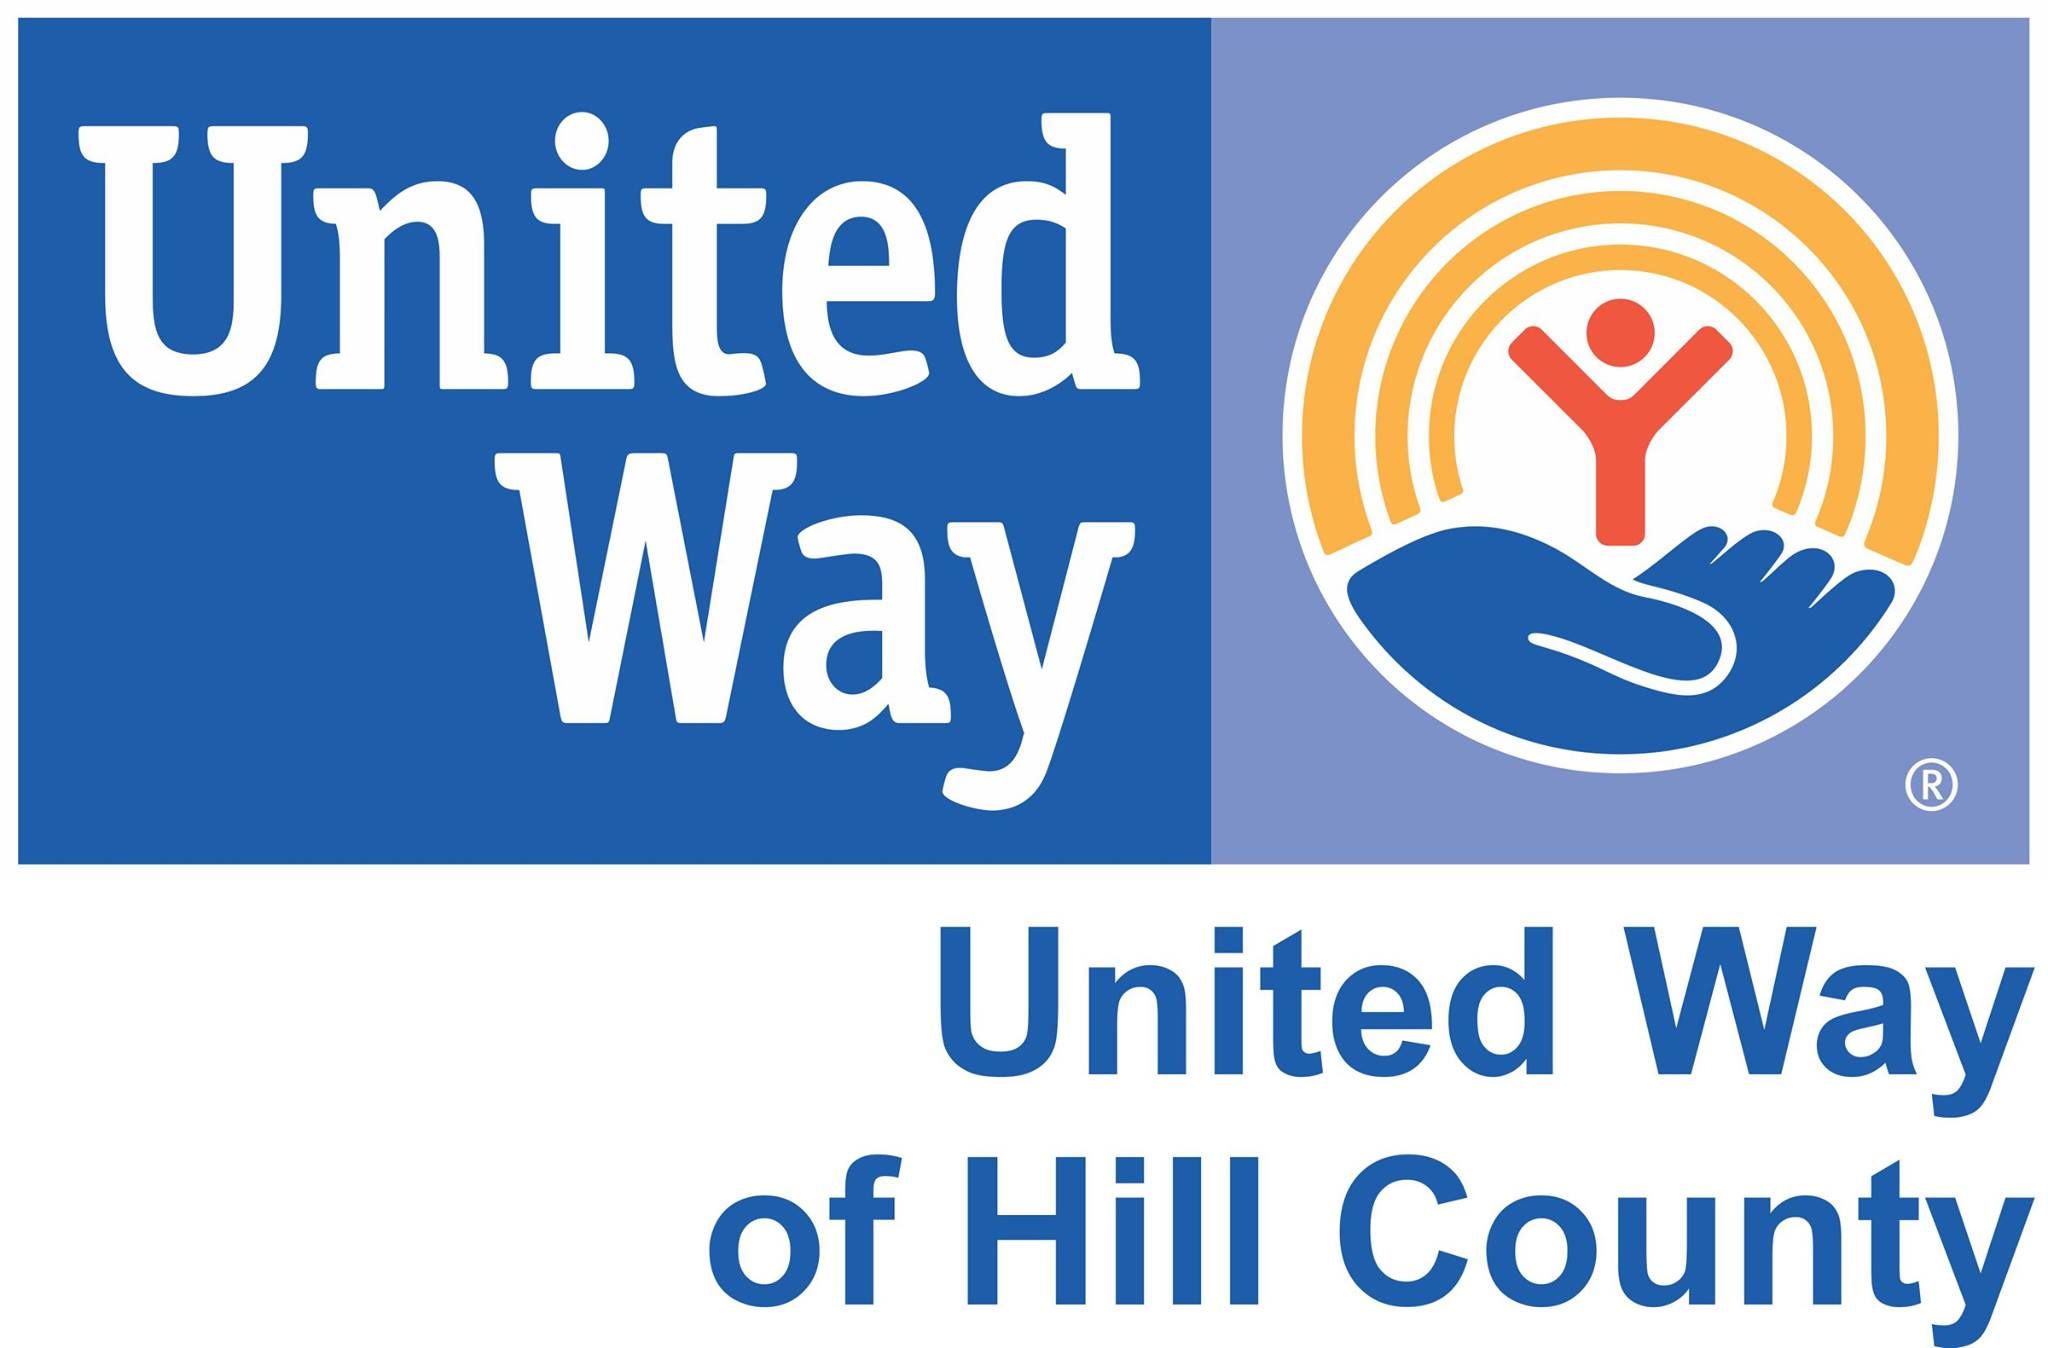 United Way of Hill County